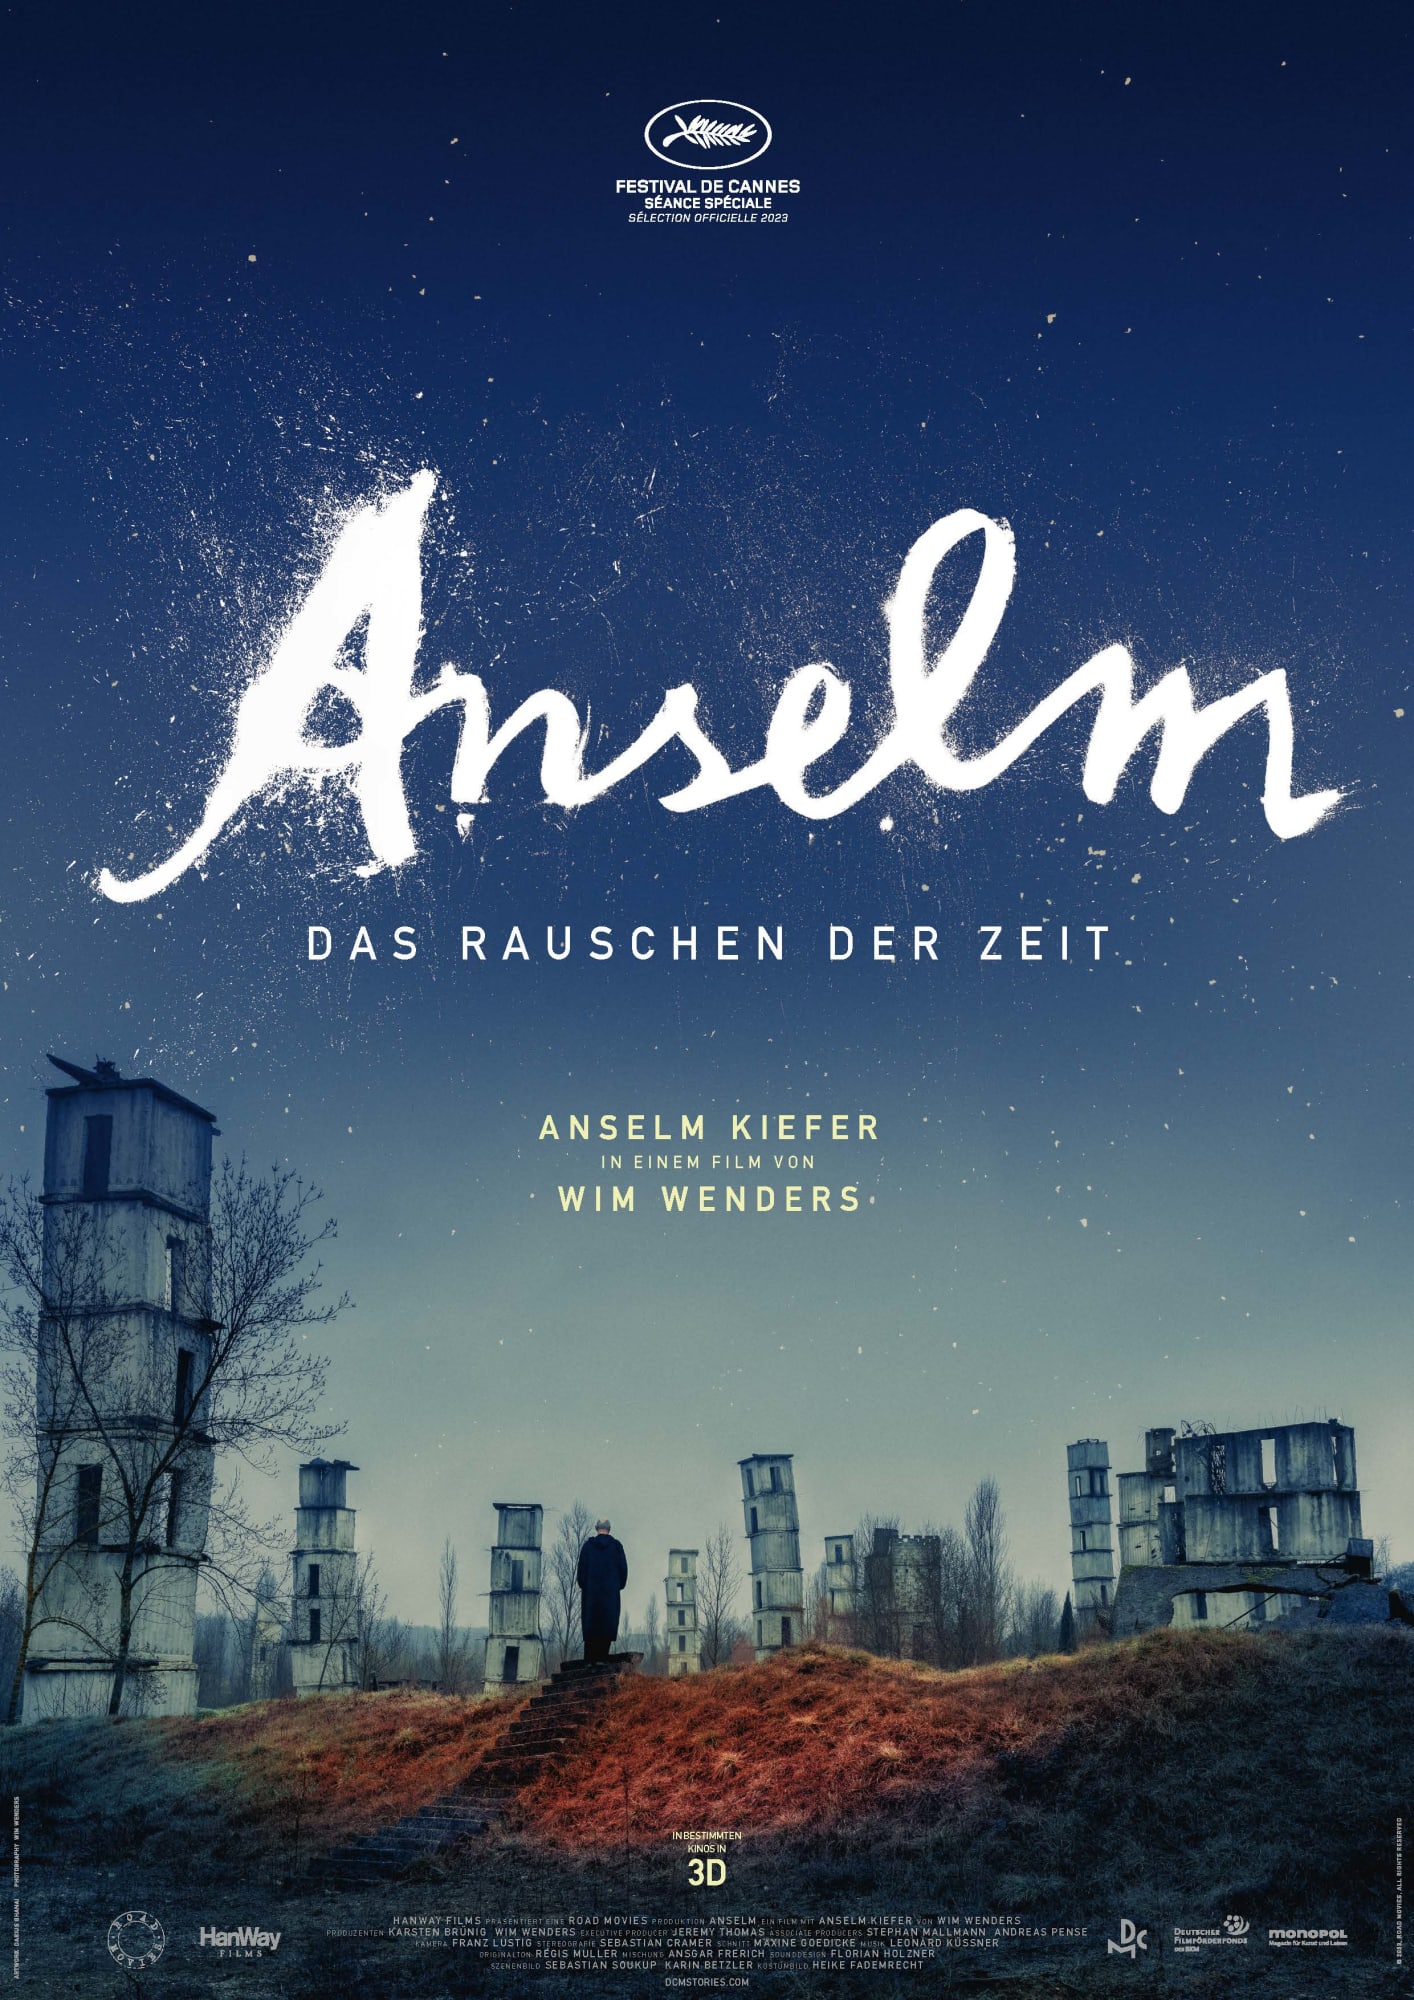 ANSELM: The Sound of Time A film by Wim Wenders